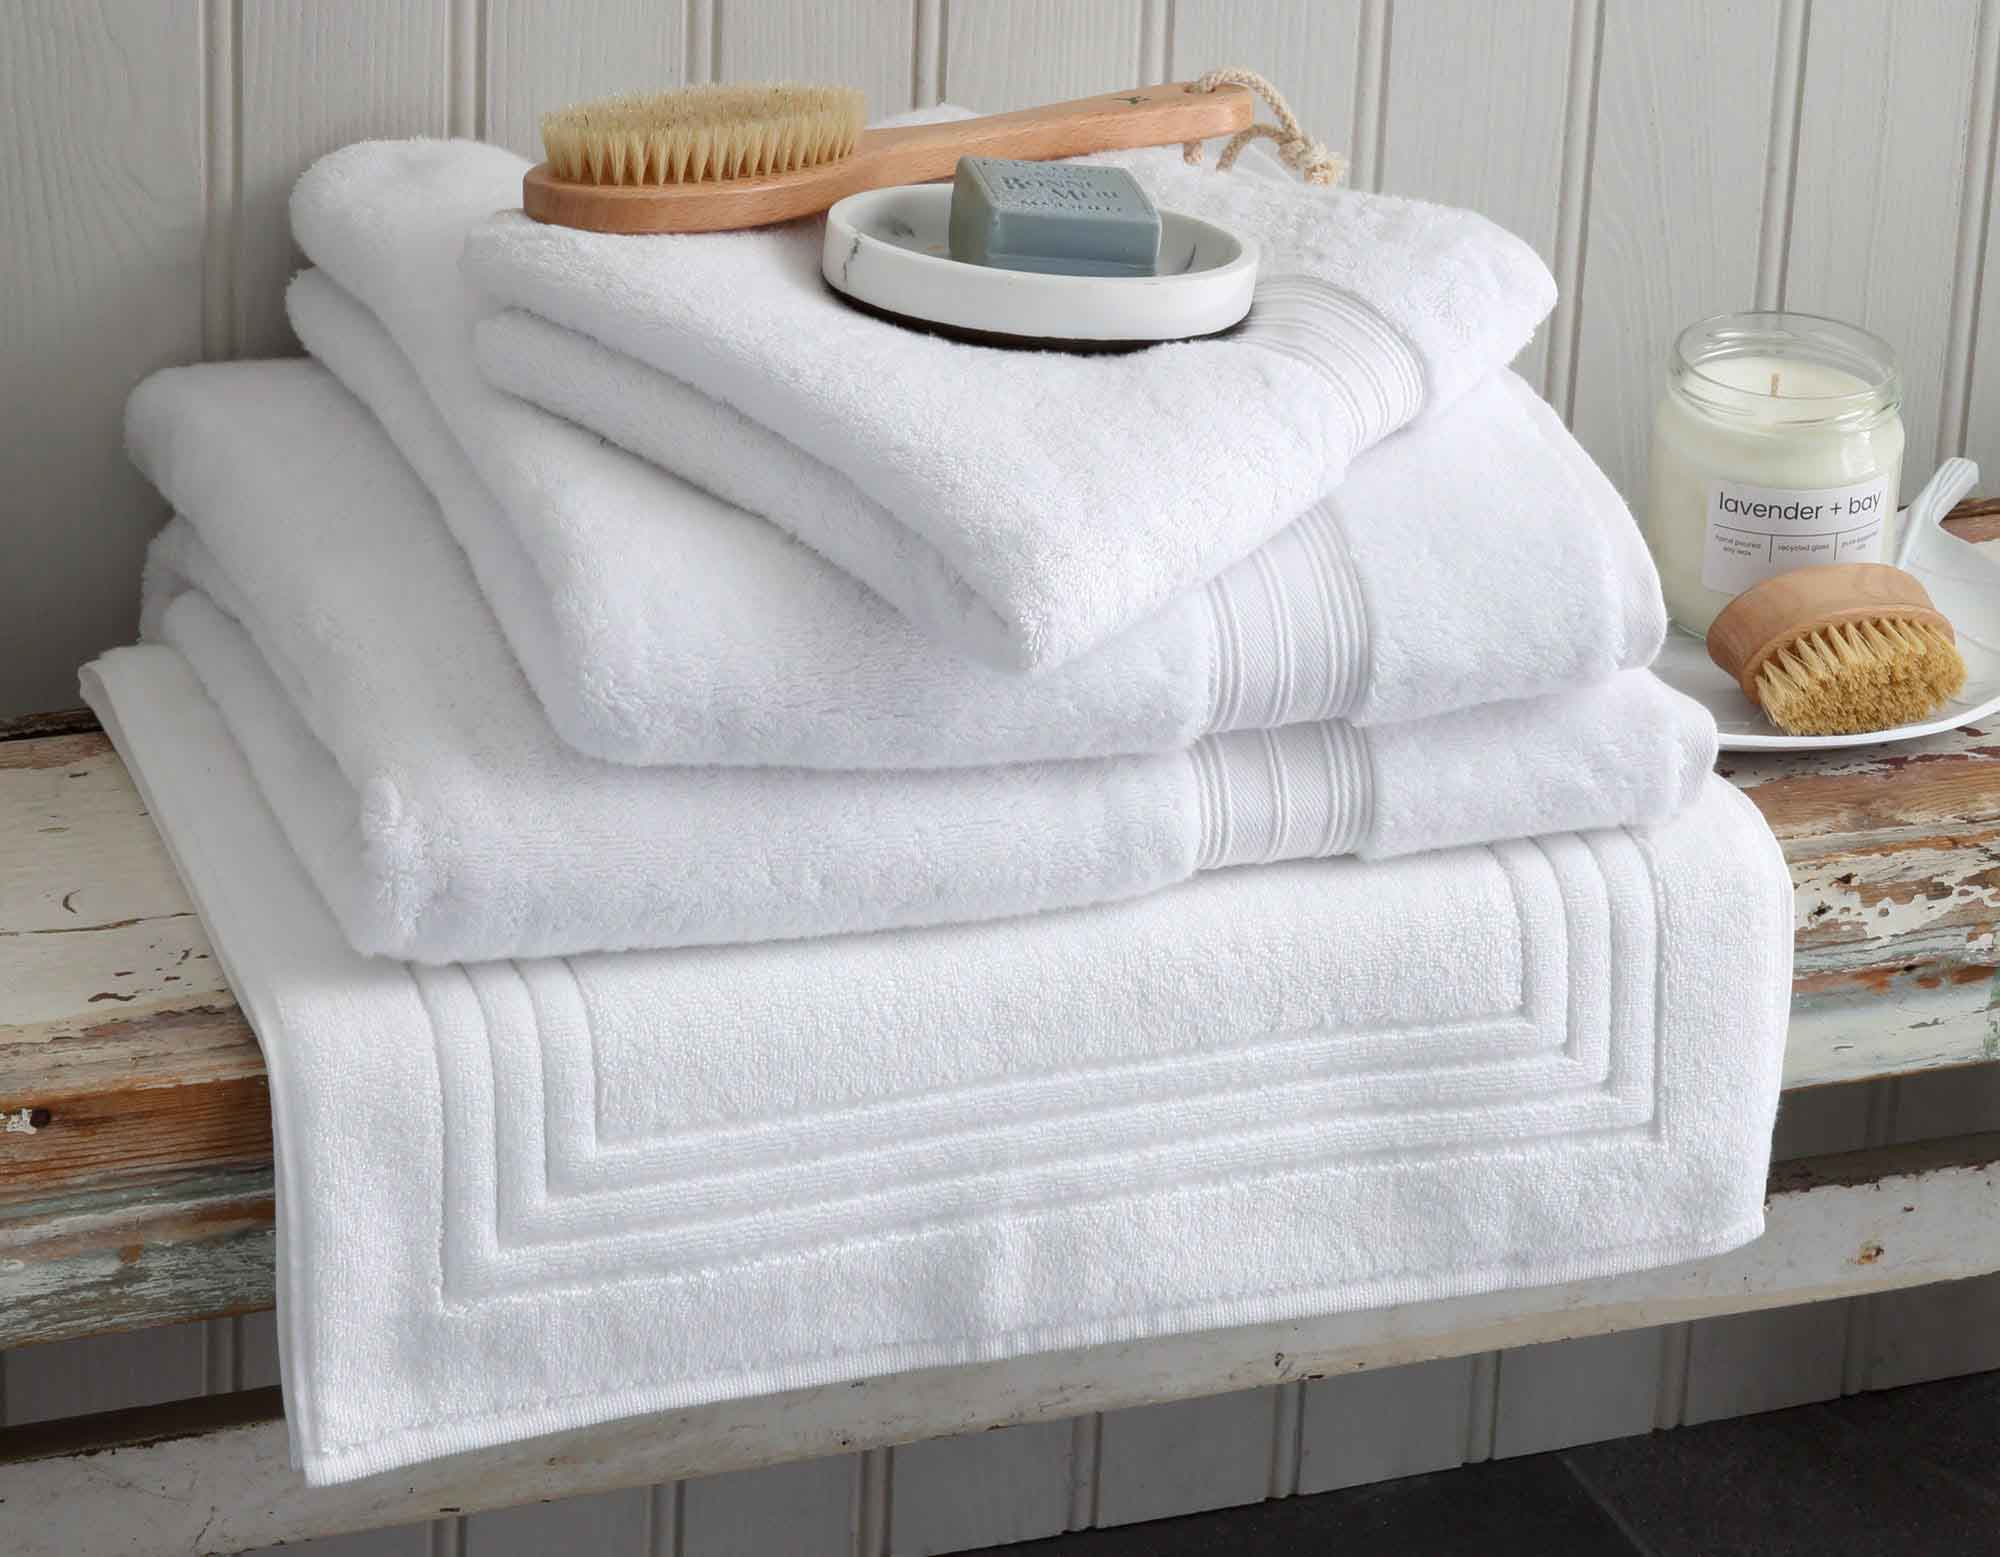 How to make your towels fluffier